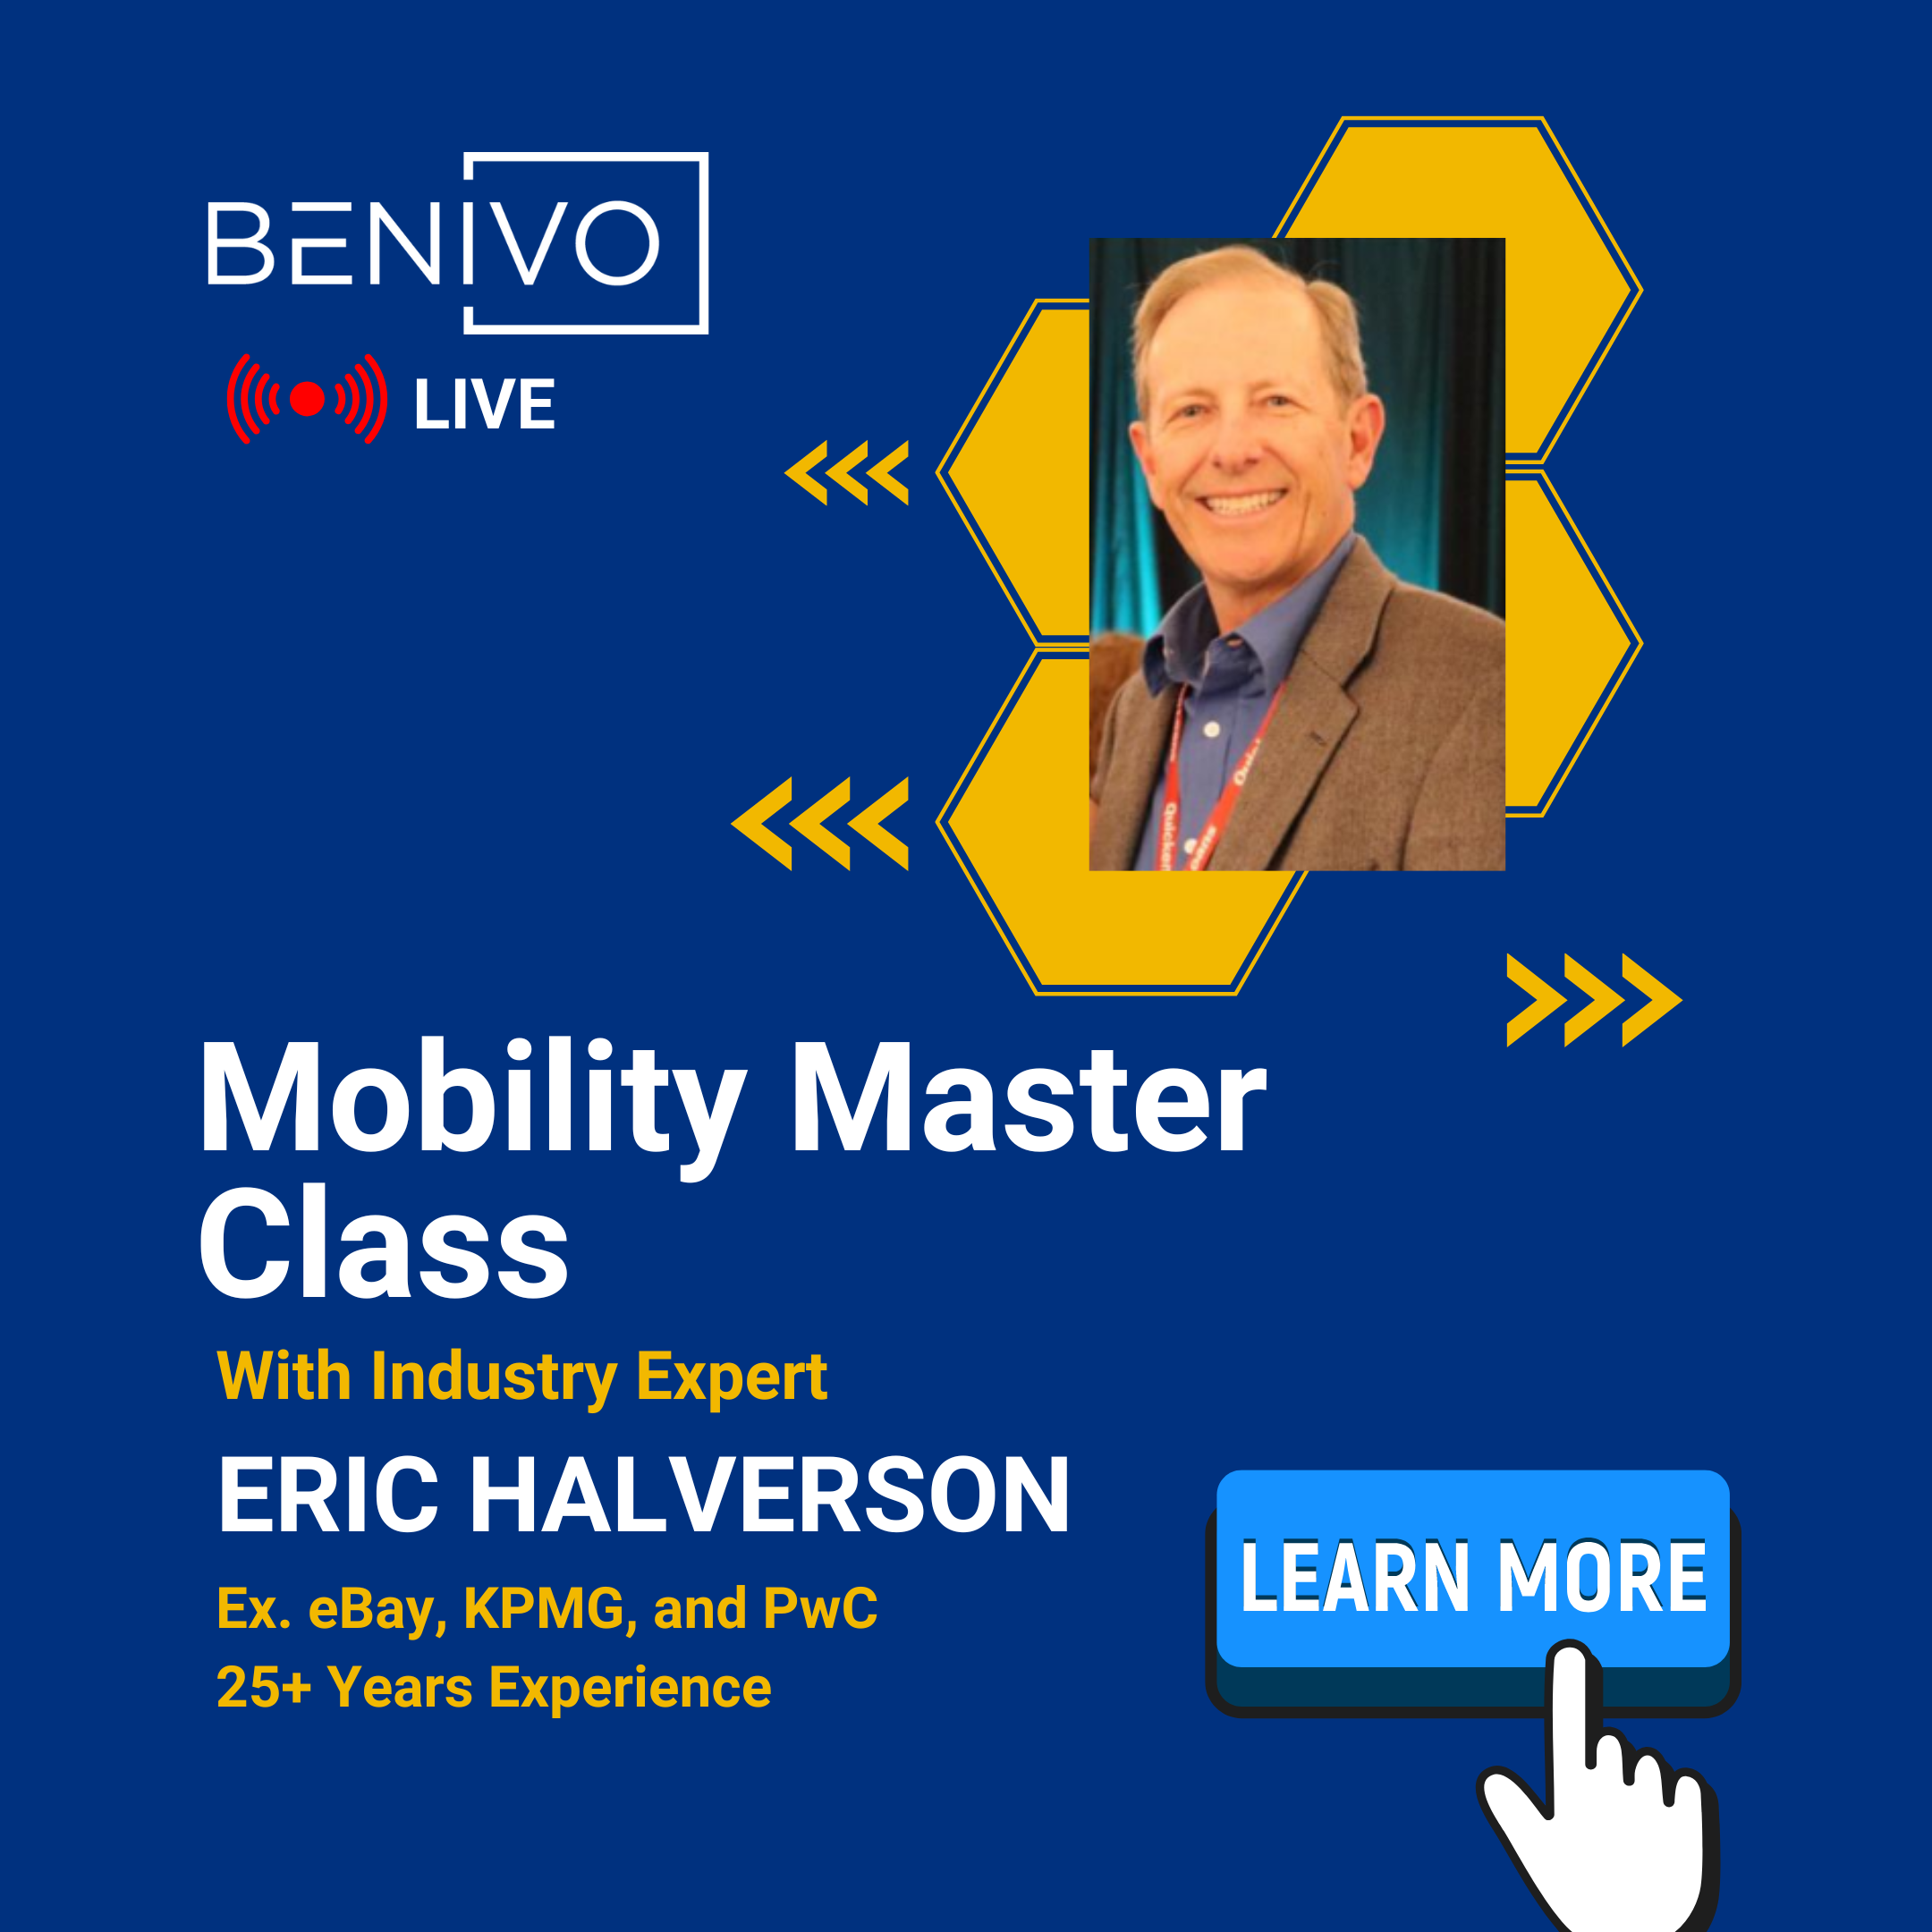 Last Chance to register for the New Mobility Master Class with Industry Expert Eric Halverson